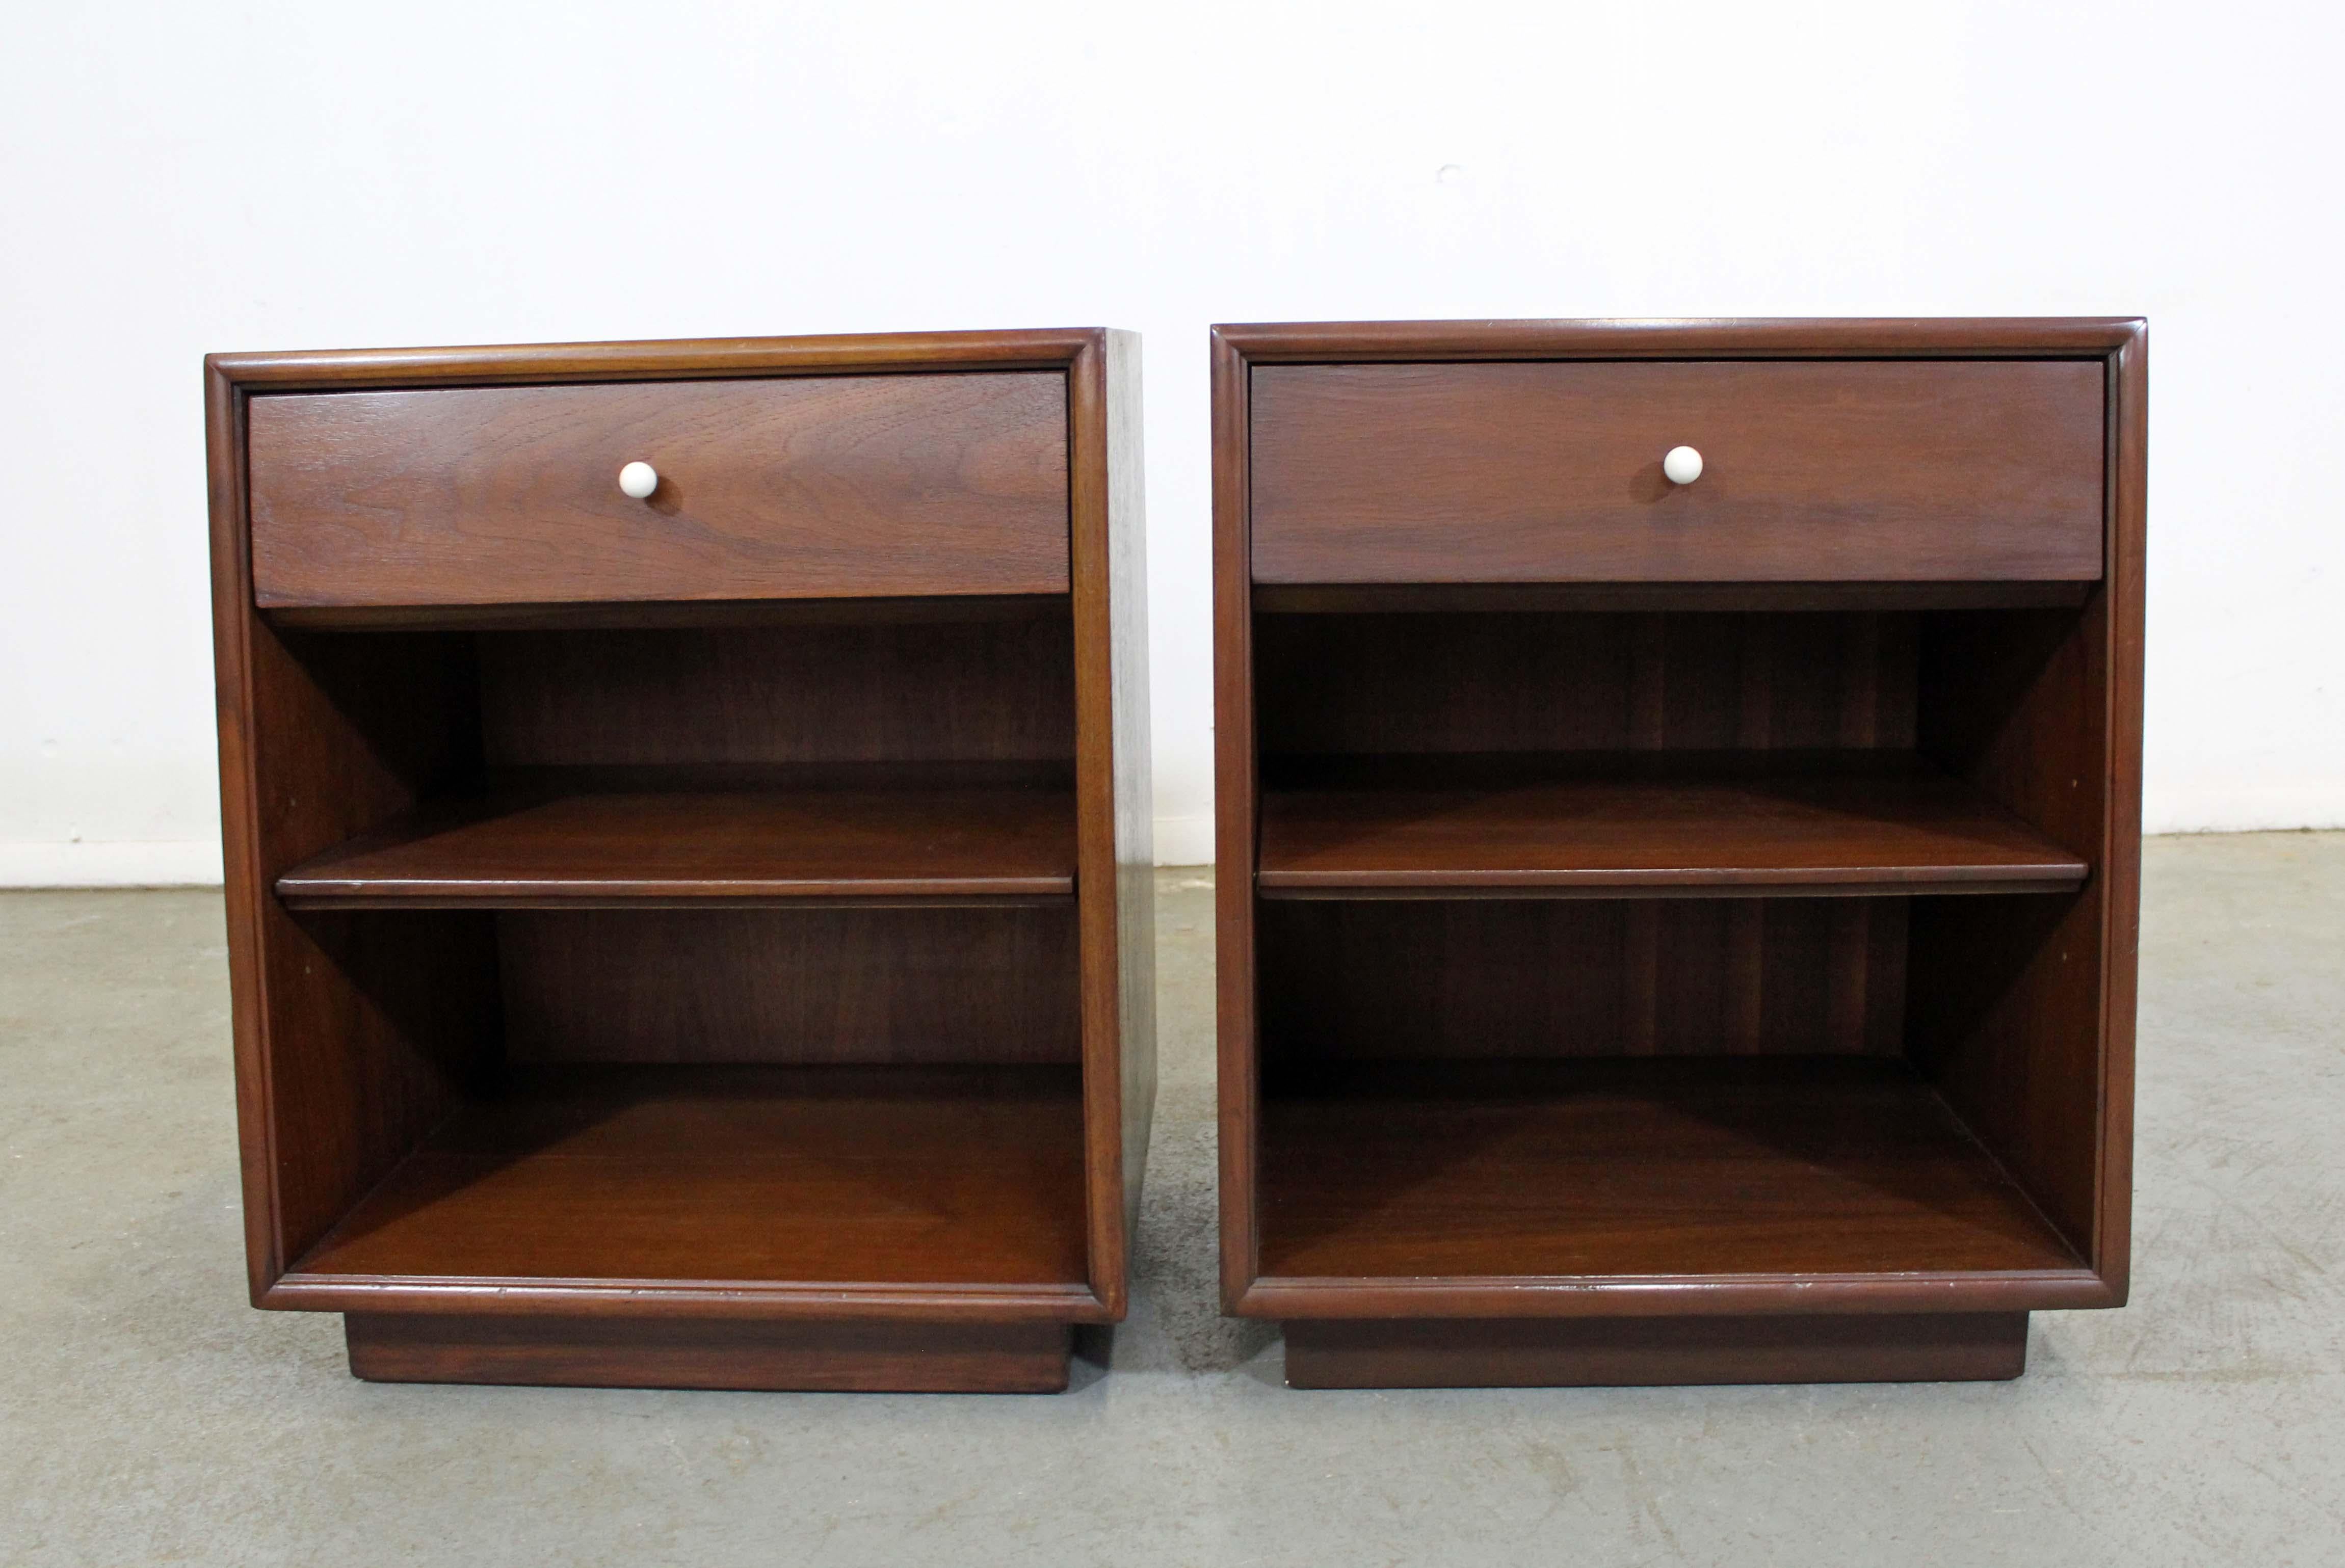 Offered is a pair of walnut nightstands designed by Kipp Stewart for Drexel 